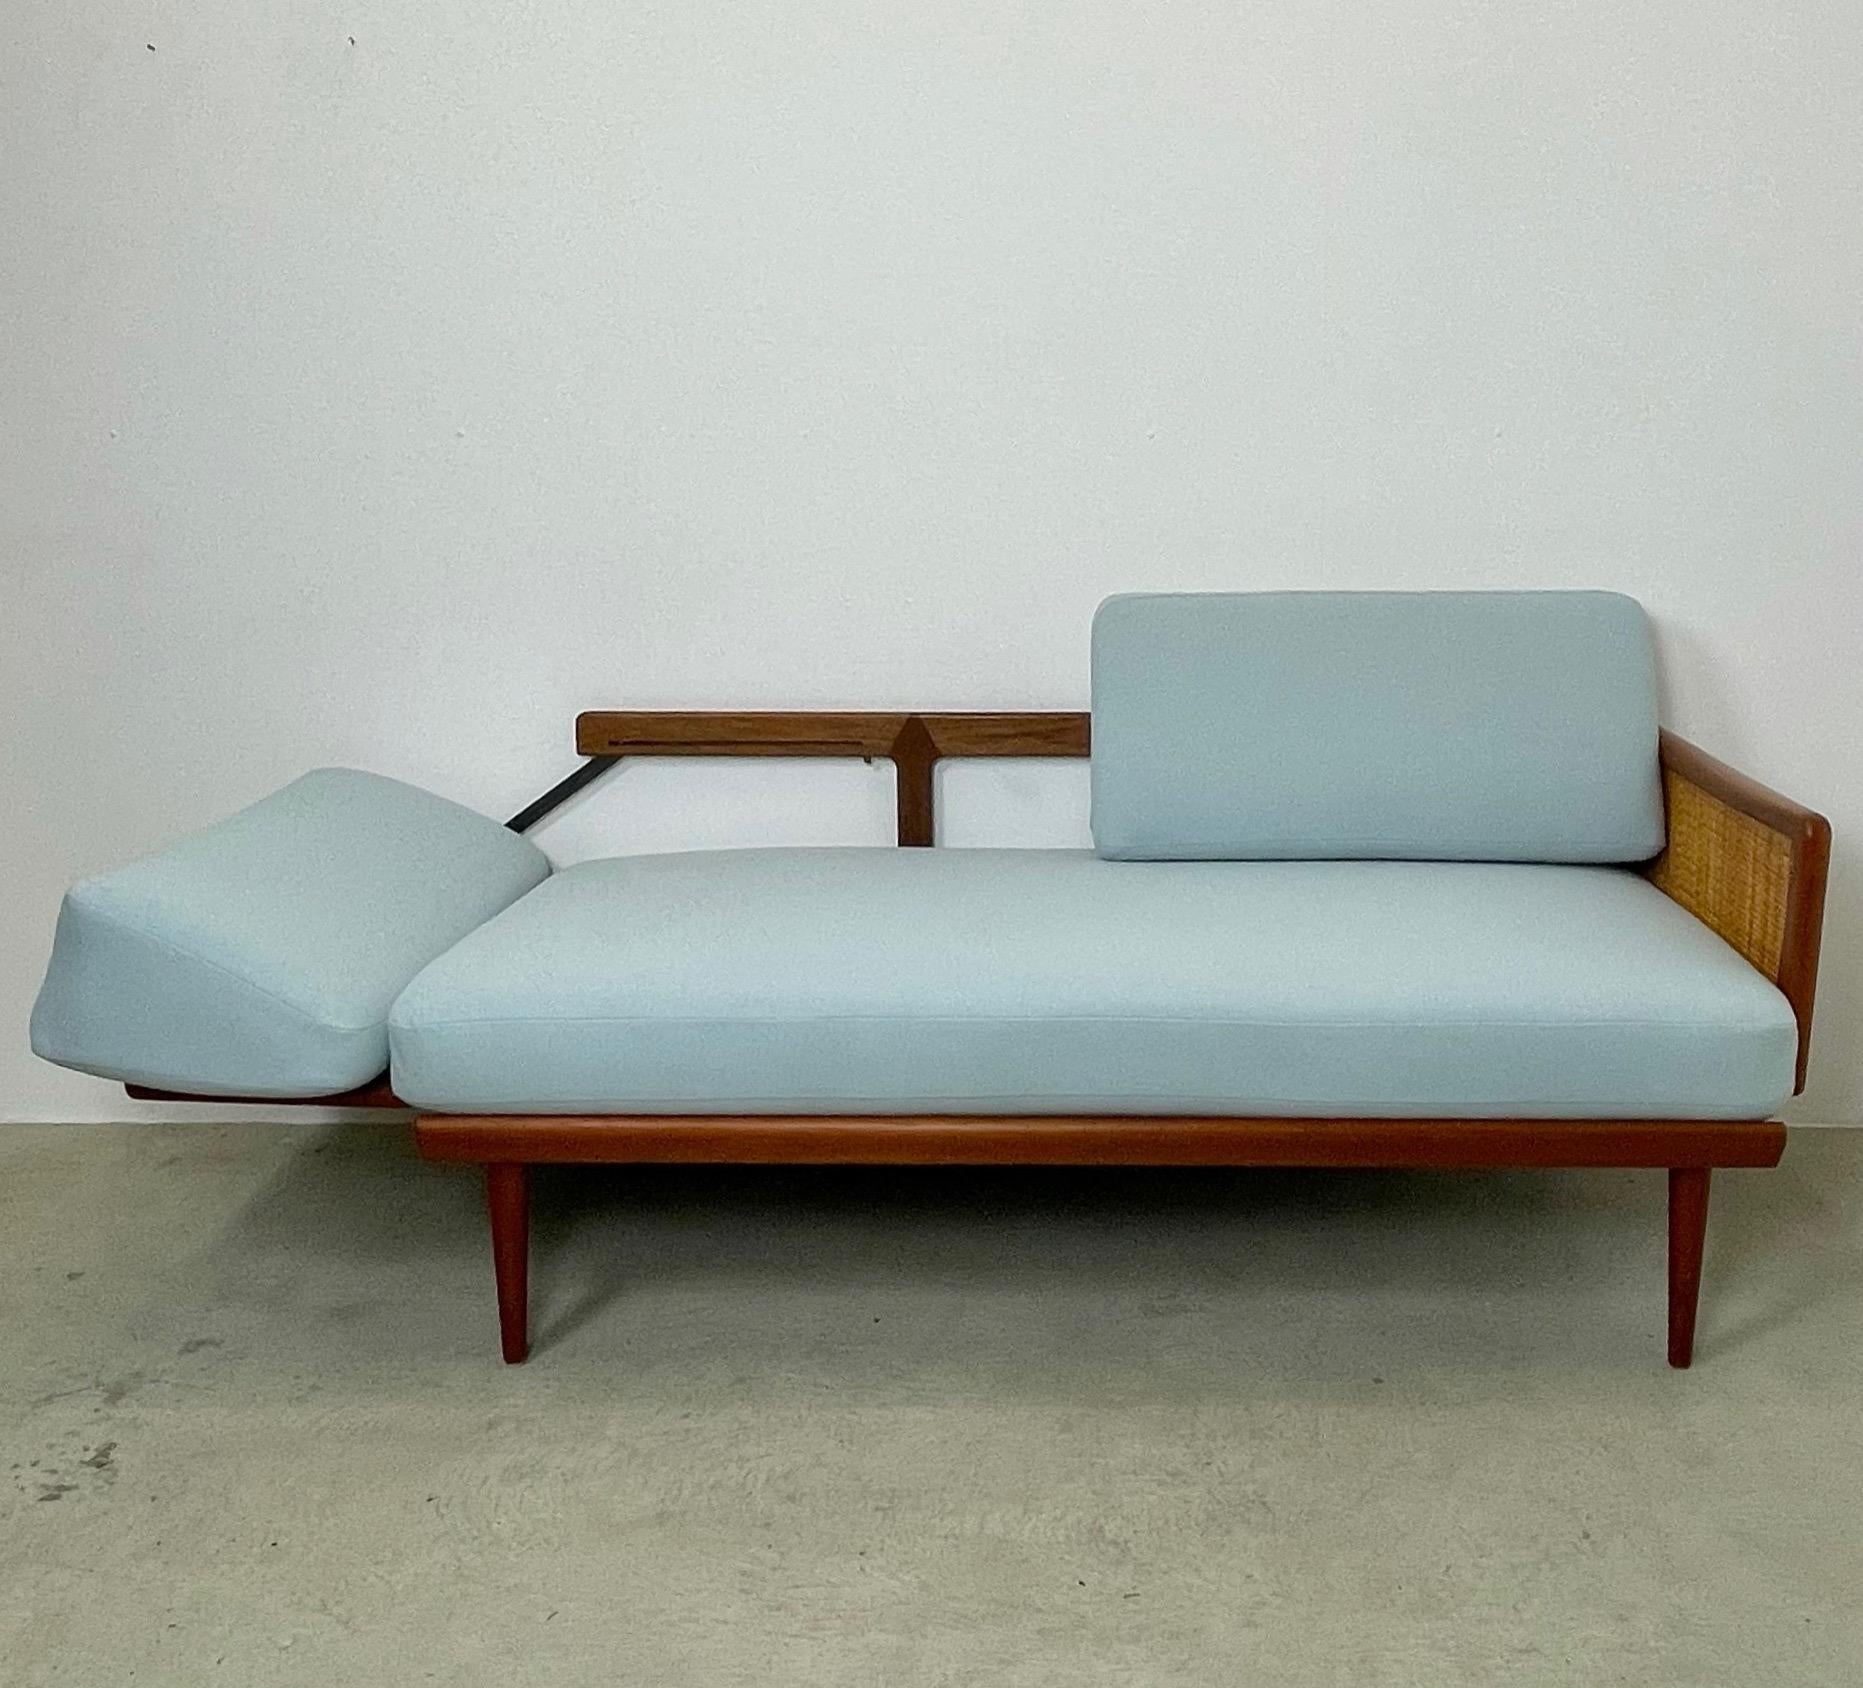 50's couch